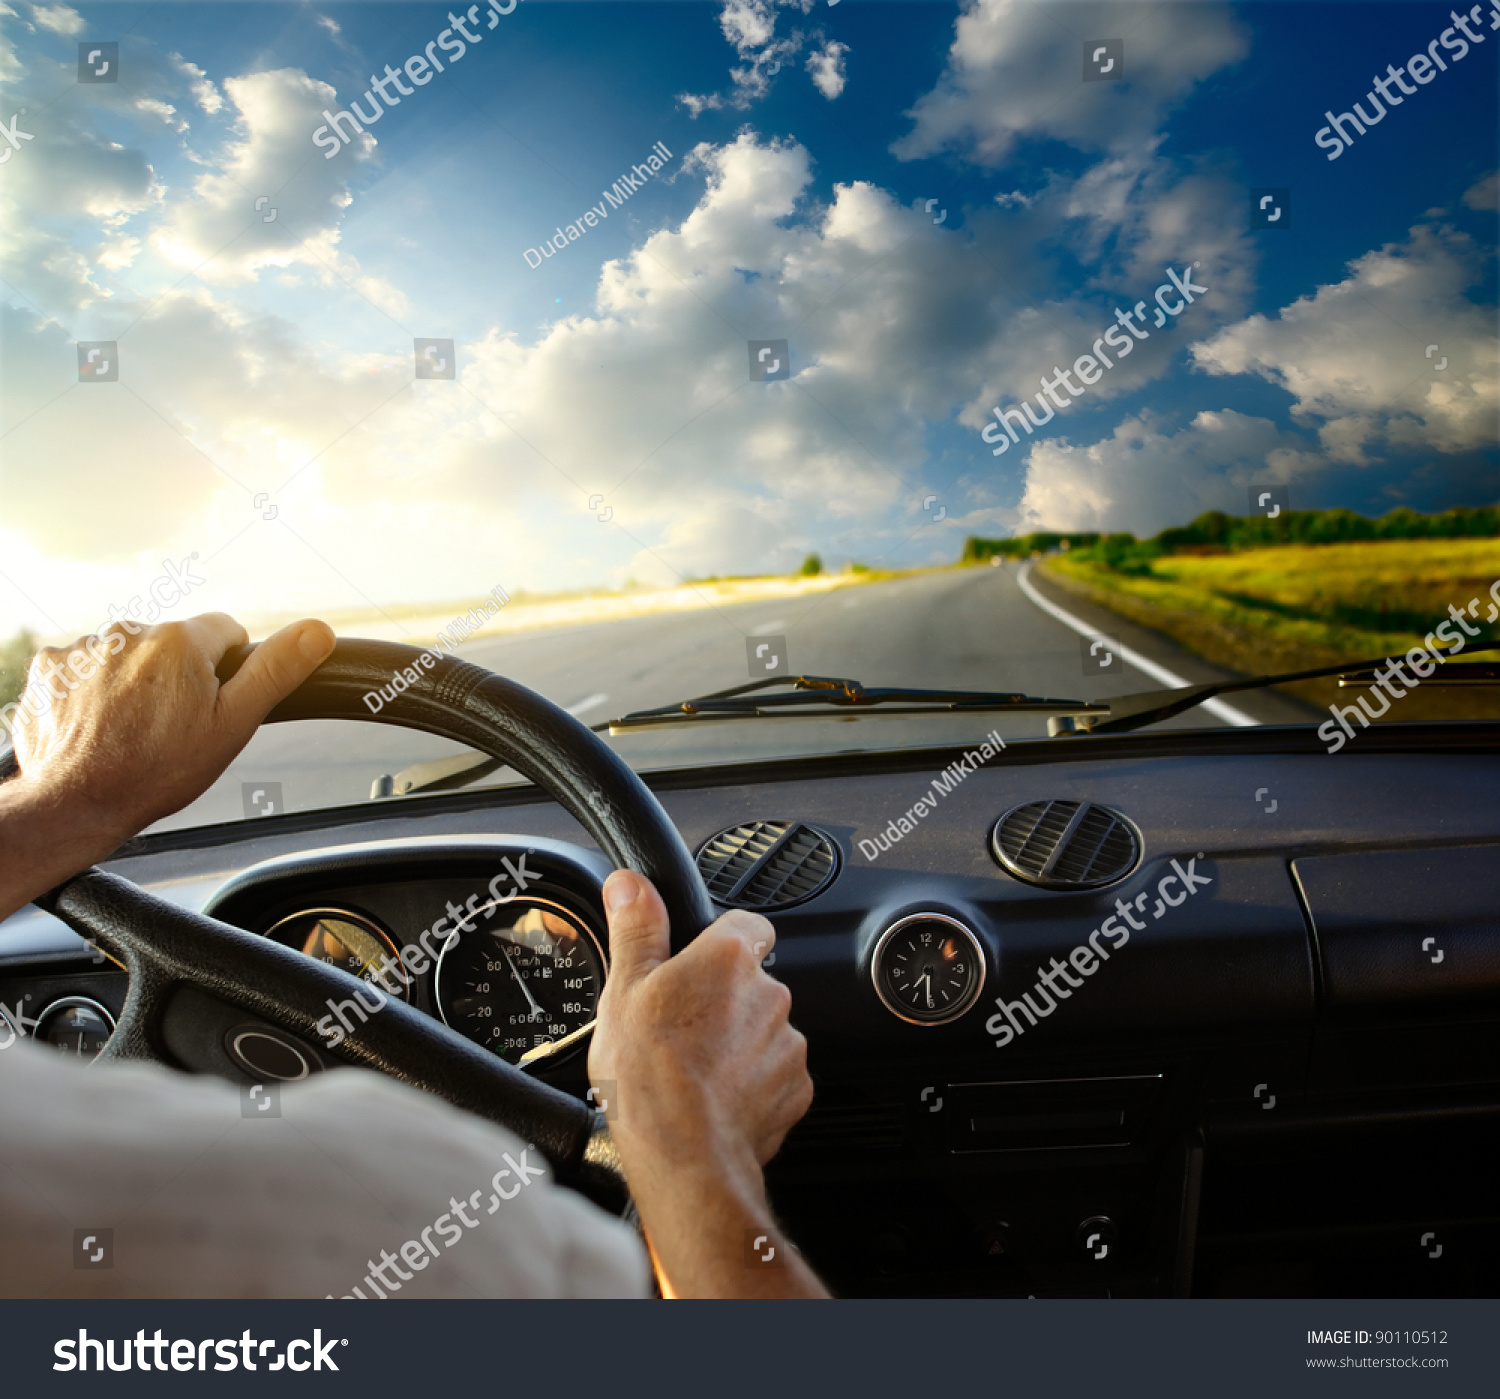 Hands of a driver on steering wheel of a car and empty asphalt road #90110512